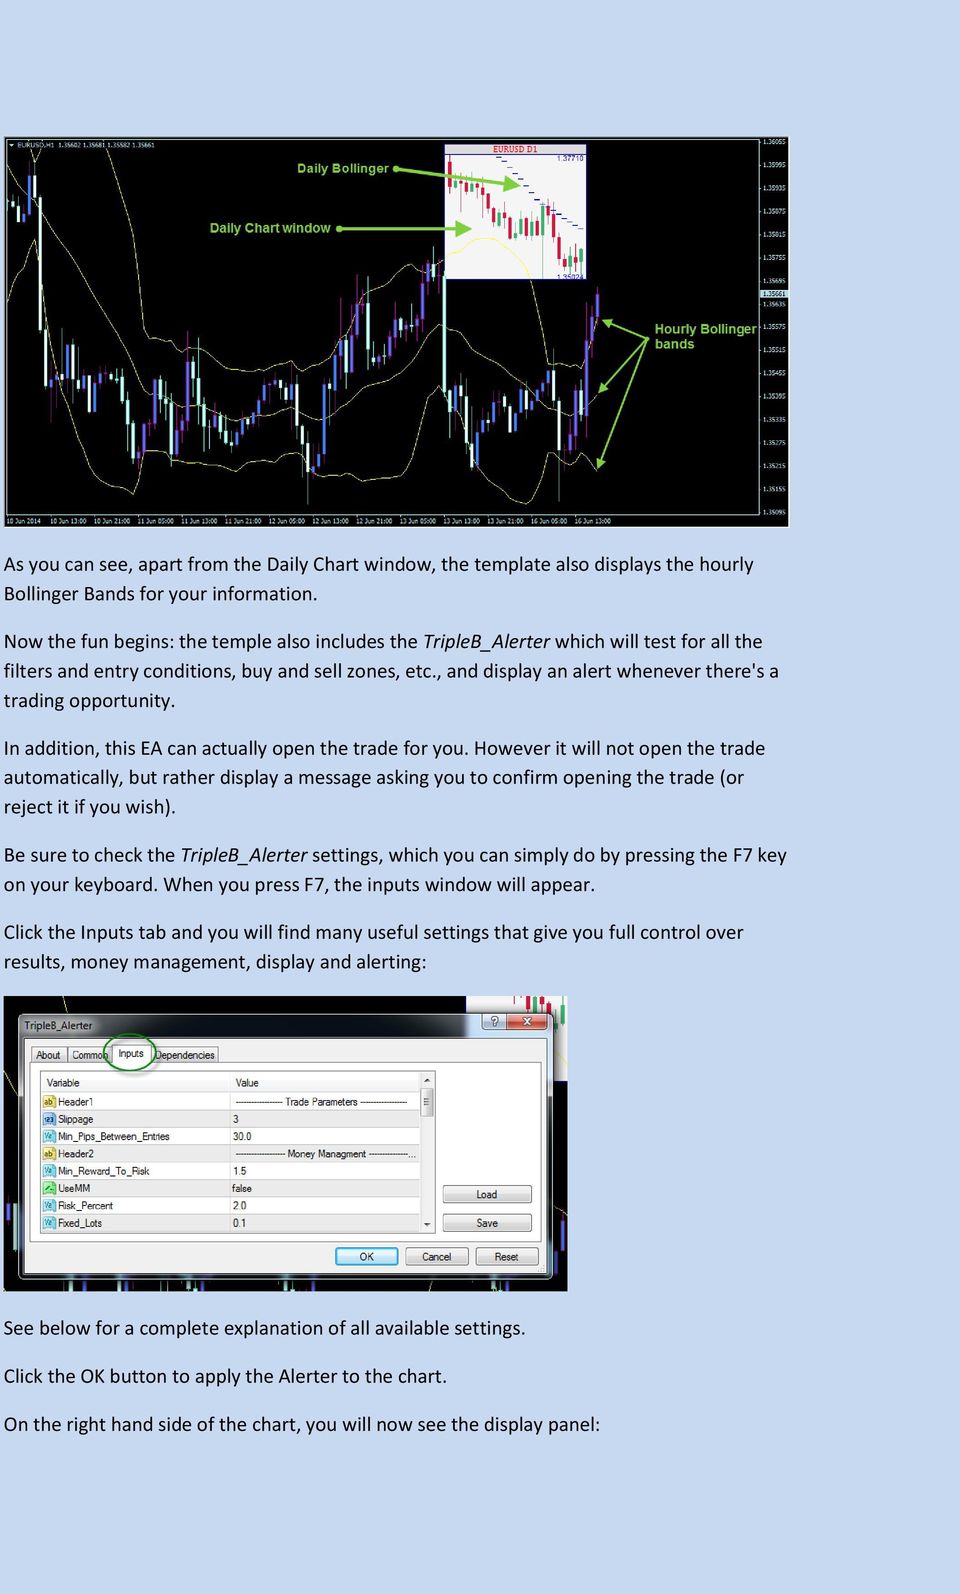 , and display an alert whenever there's a trading opportunity. In addition, this EA can actually open the trade for you.